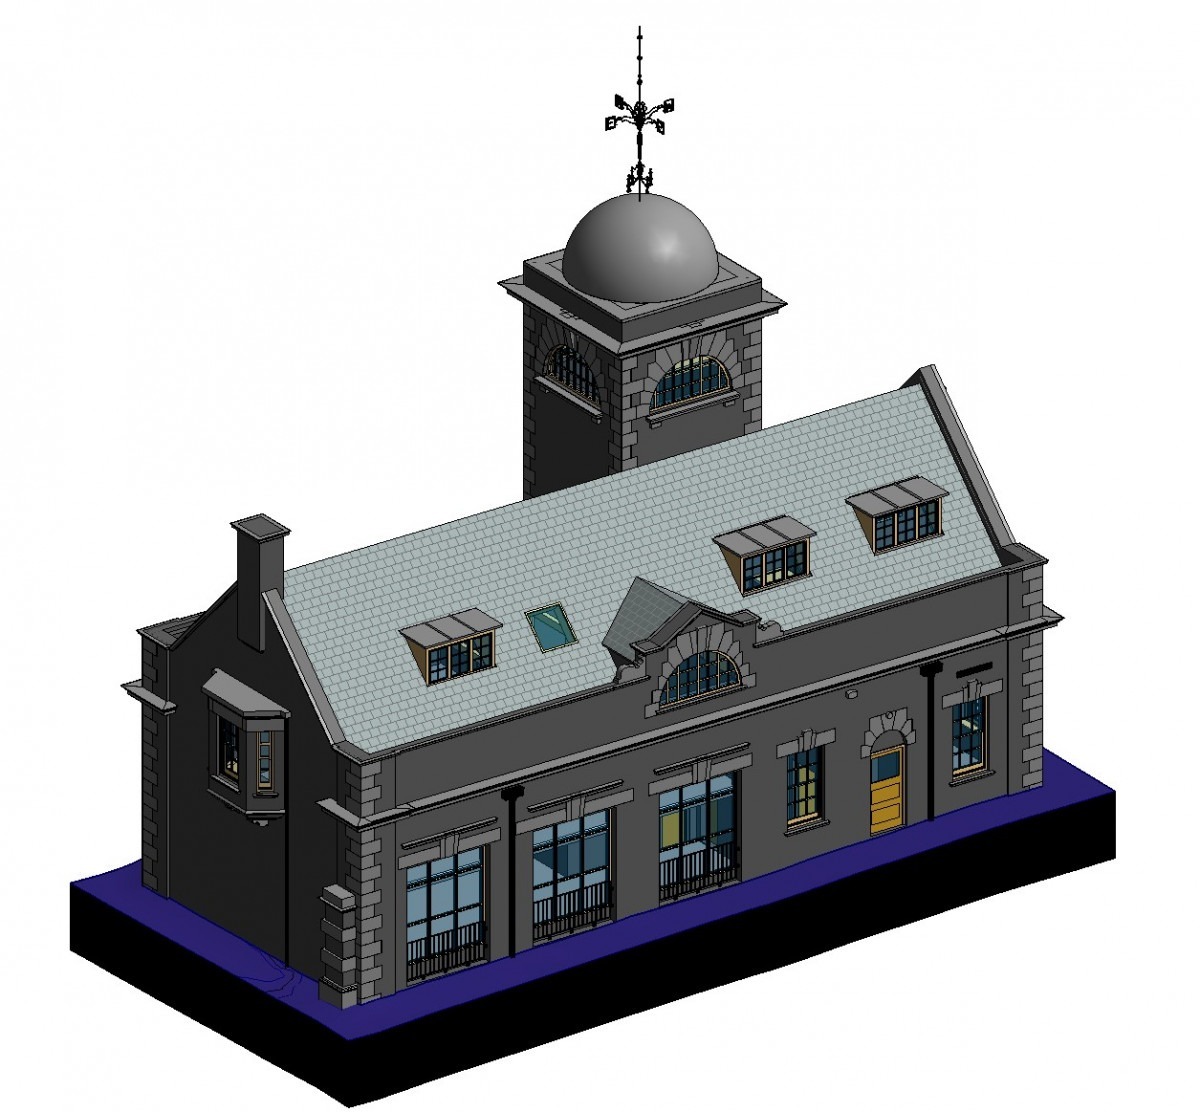 View of a 3D Building Information Model of the old fire station in Lancaster